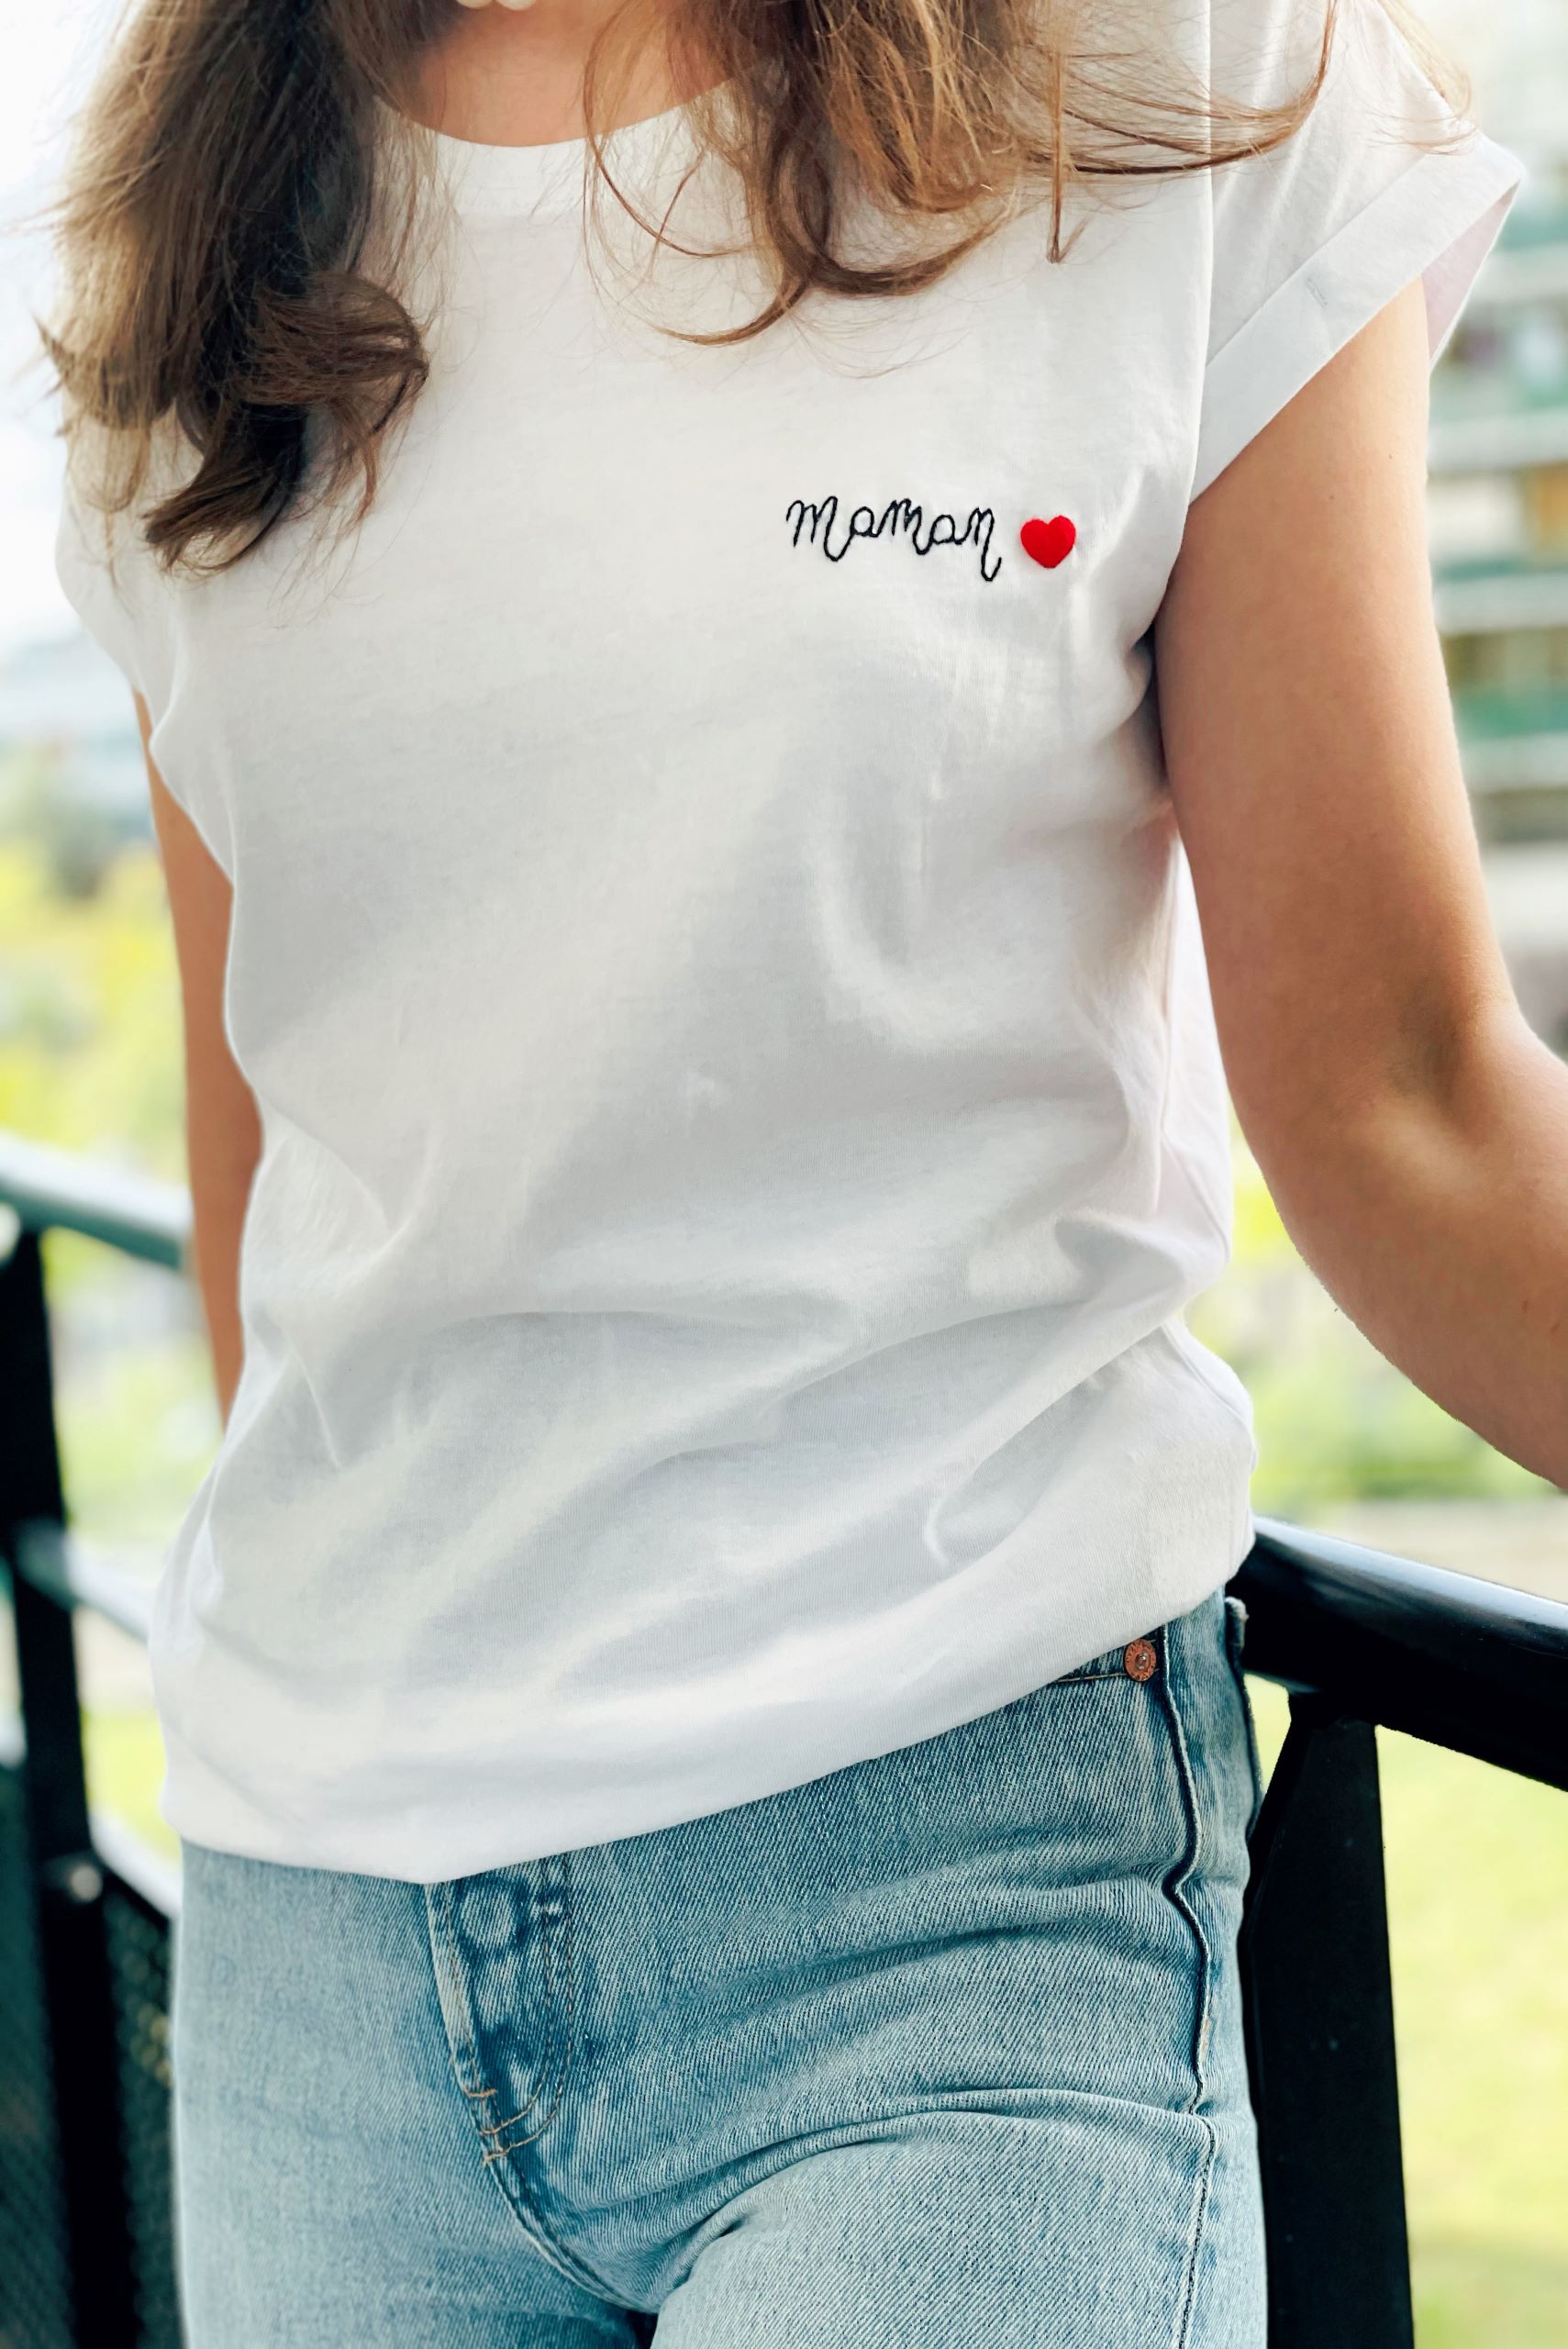 Retaliation strong Orator Maman d'amour Hand-embroidered T-shirt | Shopping For Happiness